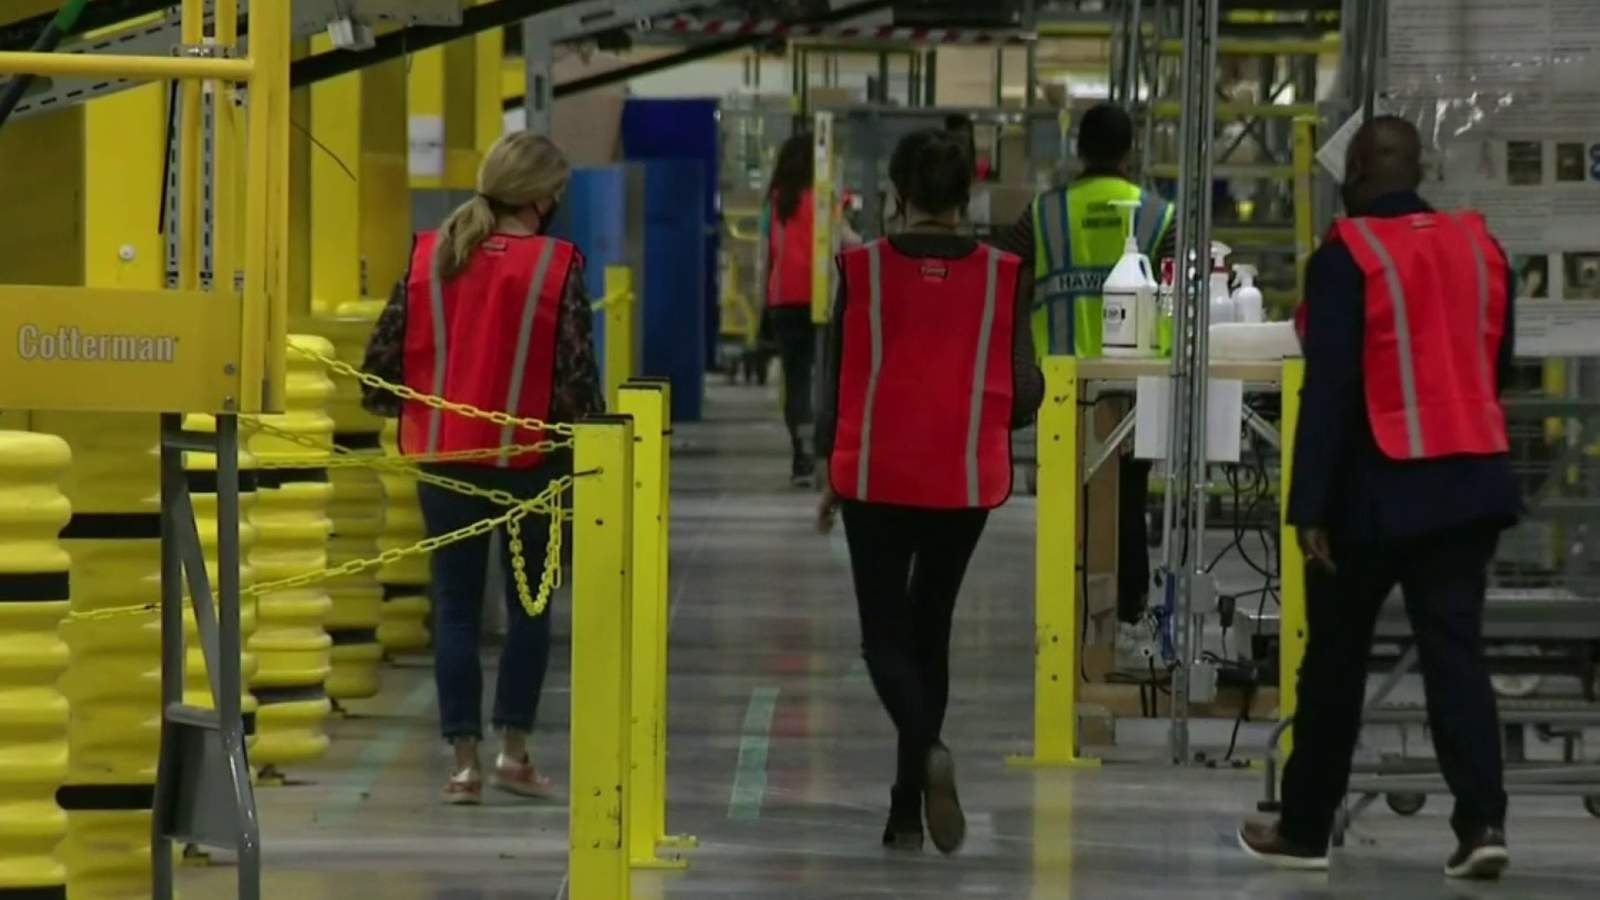 Amazon looking to hire 100,000 workers across country, including in Metro Detroit